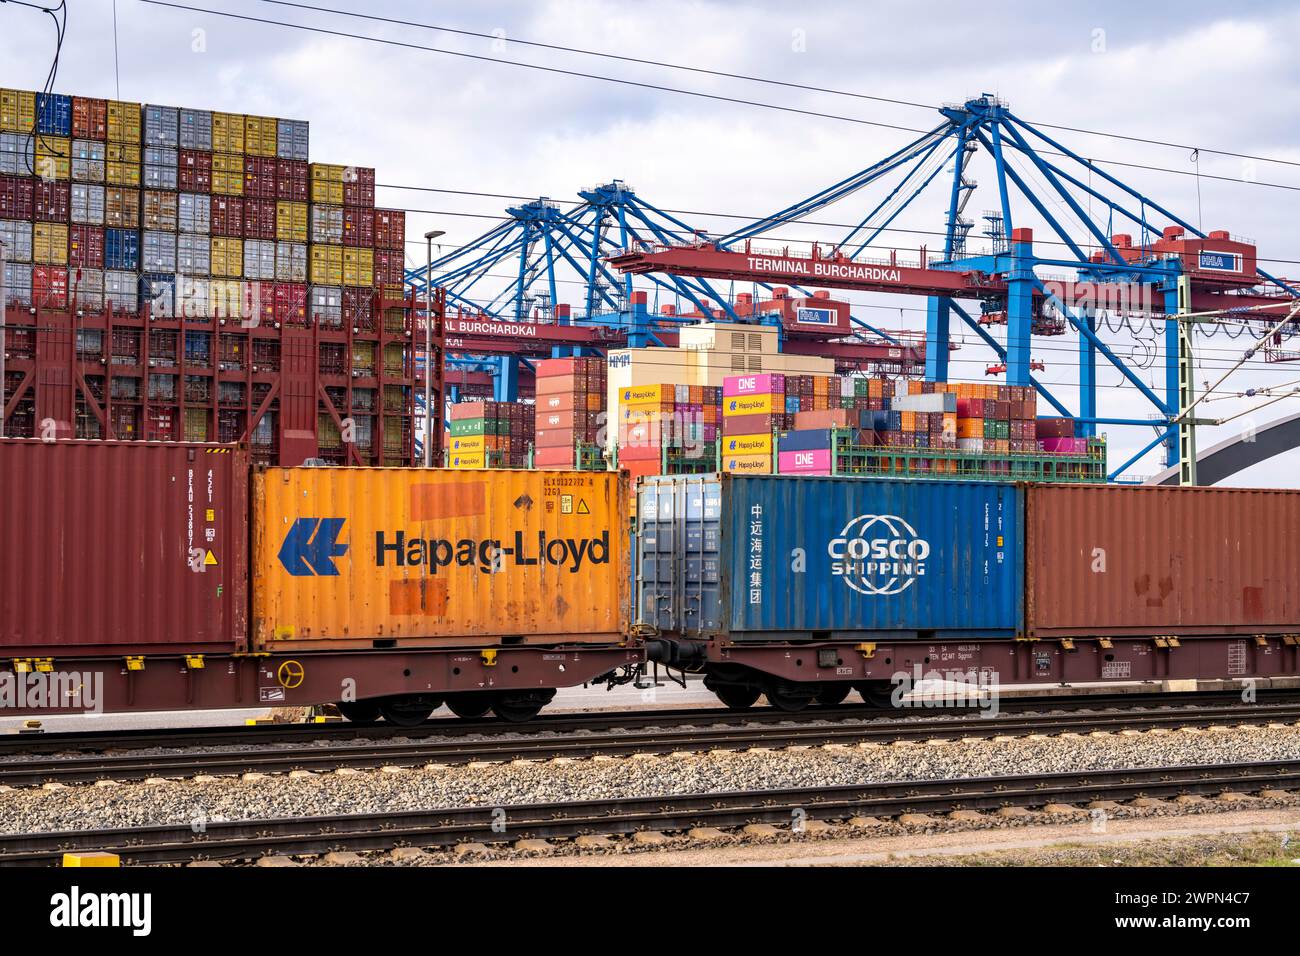 Port of Hamburg, Waltershofer Hafen, container ships, freight train brings and collects freight containers to and from HHLA Container Terminal Burchar Stock Photo